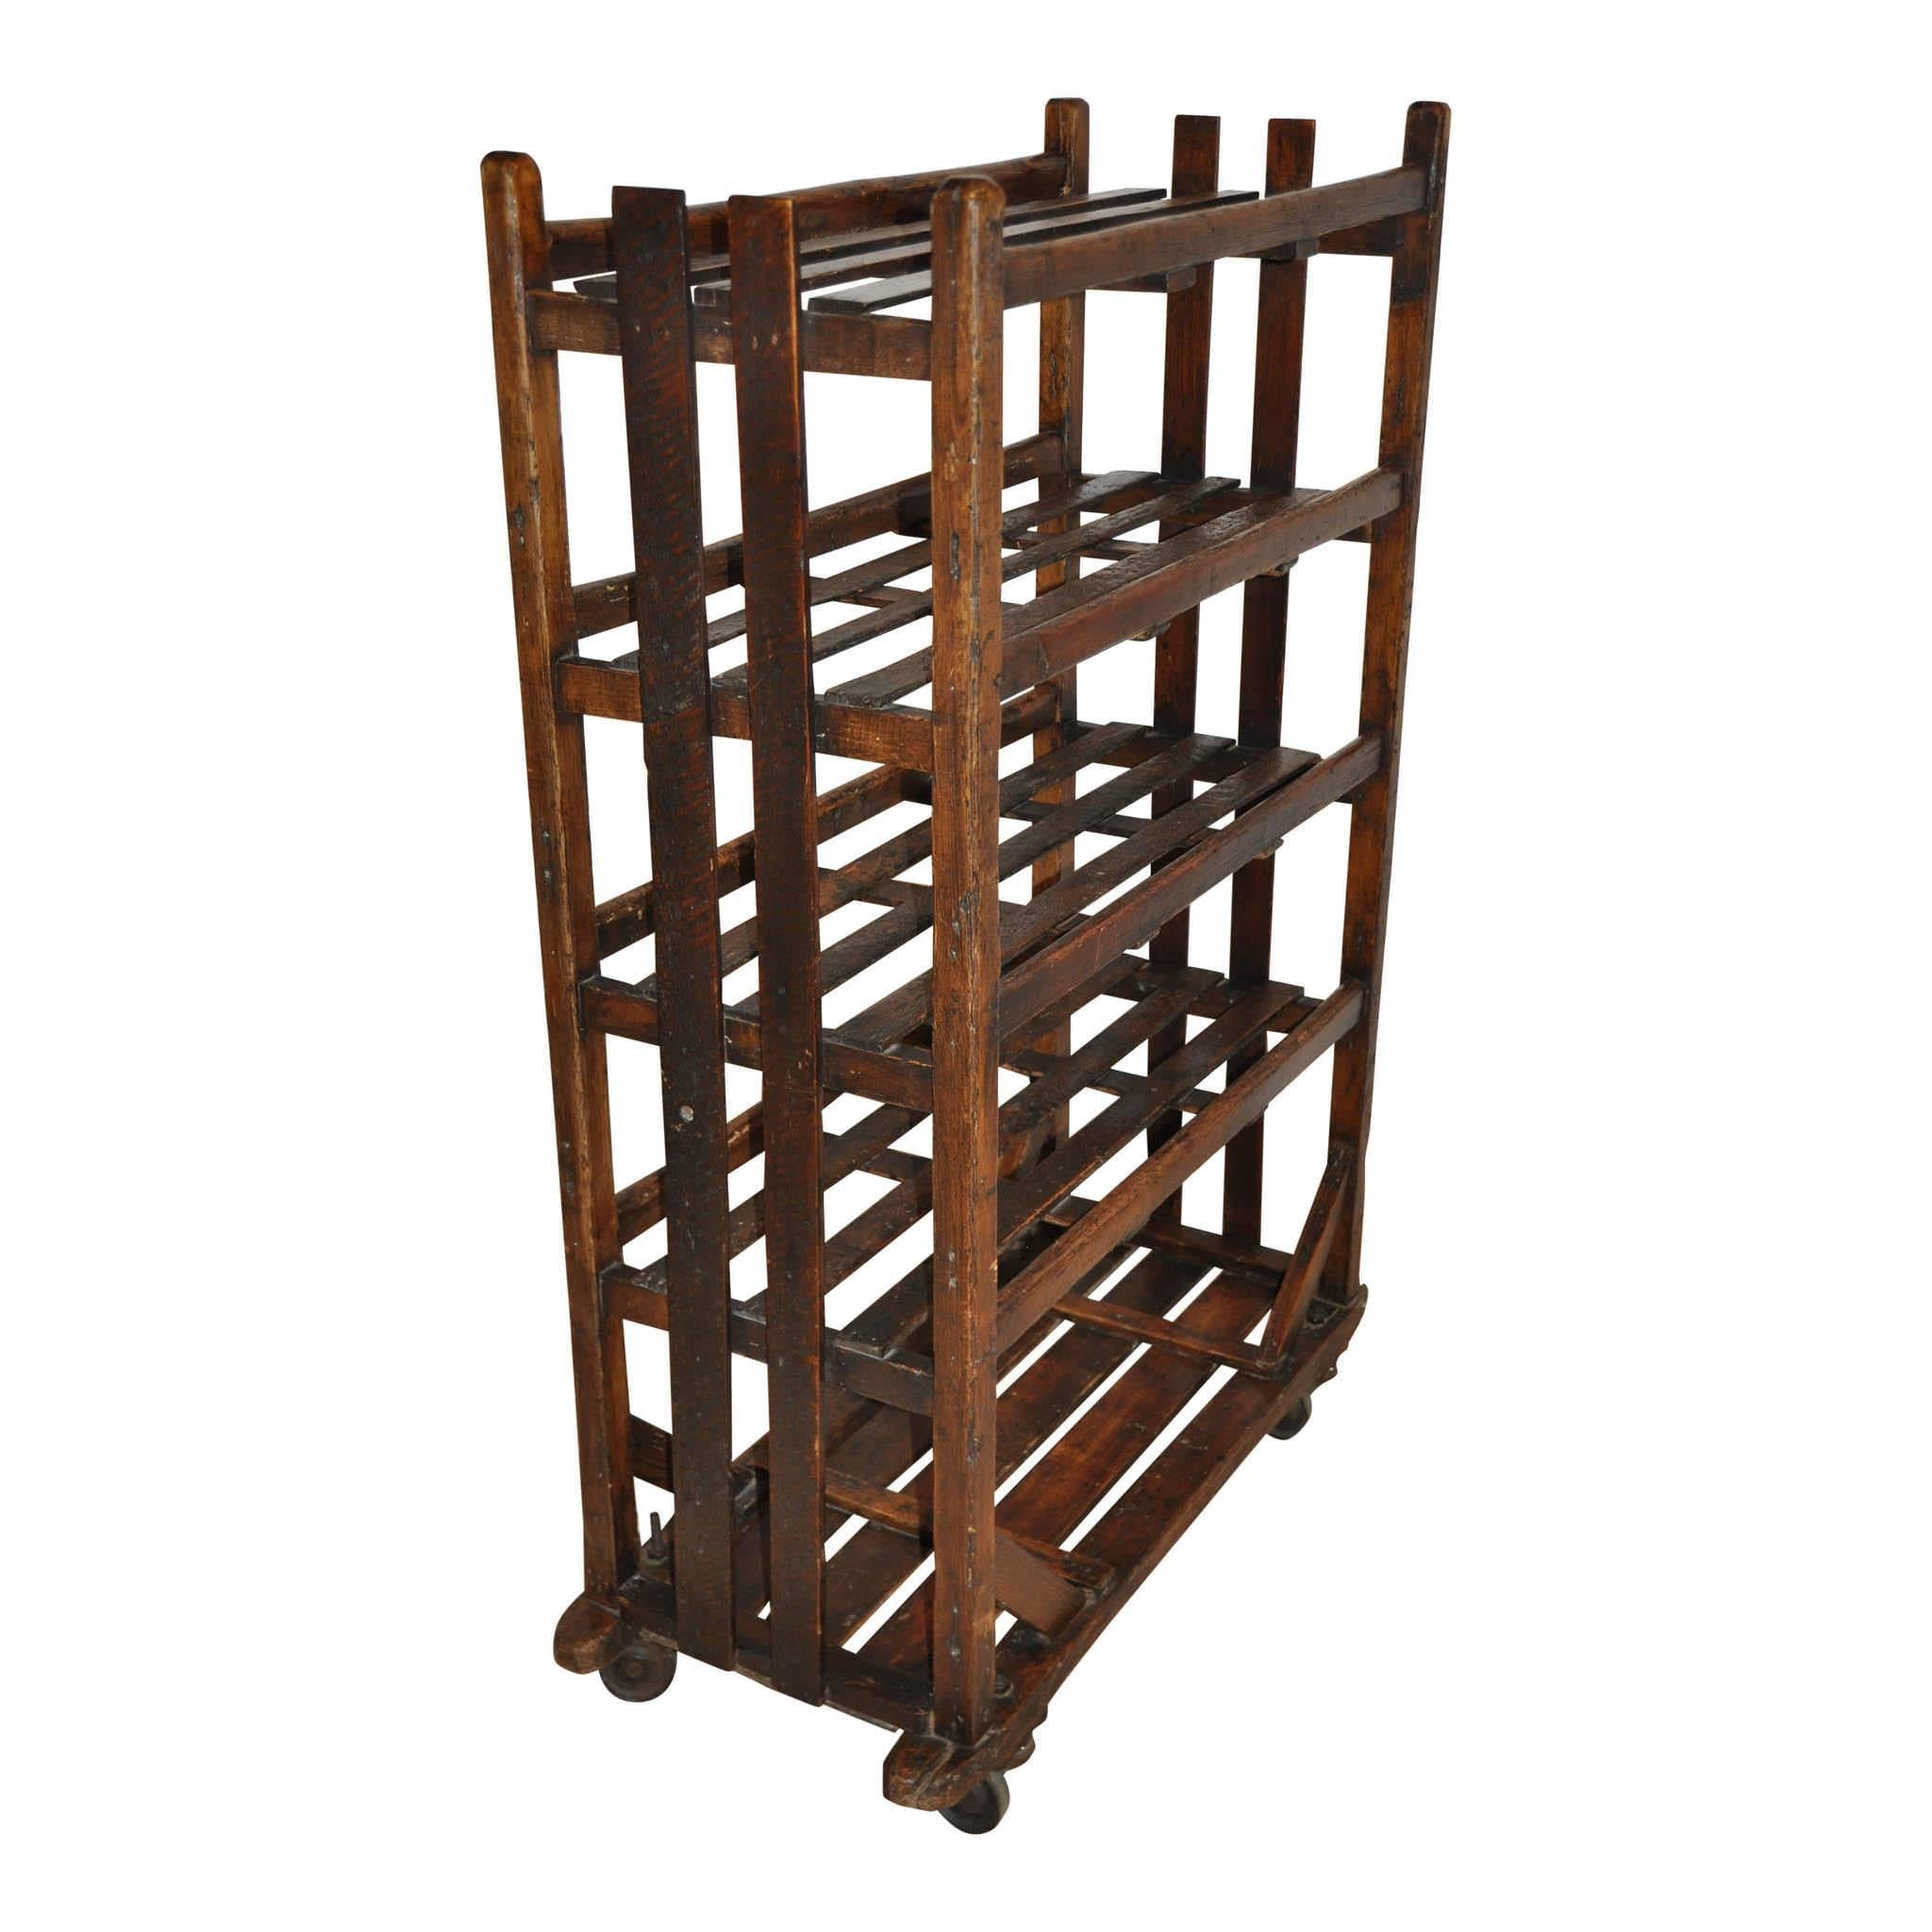 Originally used for drying shoes, this five shelf rack has so many possibilities! Use it in your own home for storing wines or pantry items, as a book shelf, or in a mud room as a shoe rack. The metal wheels make it easy to move anywhere. There is